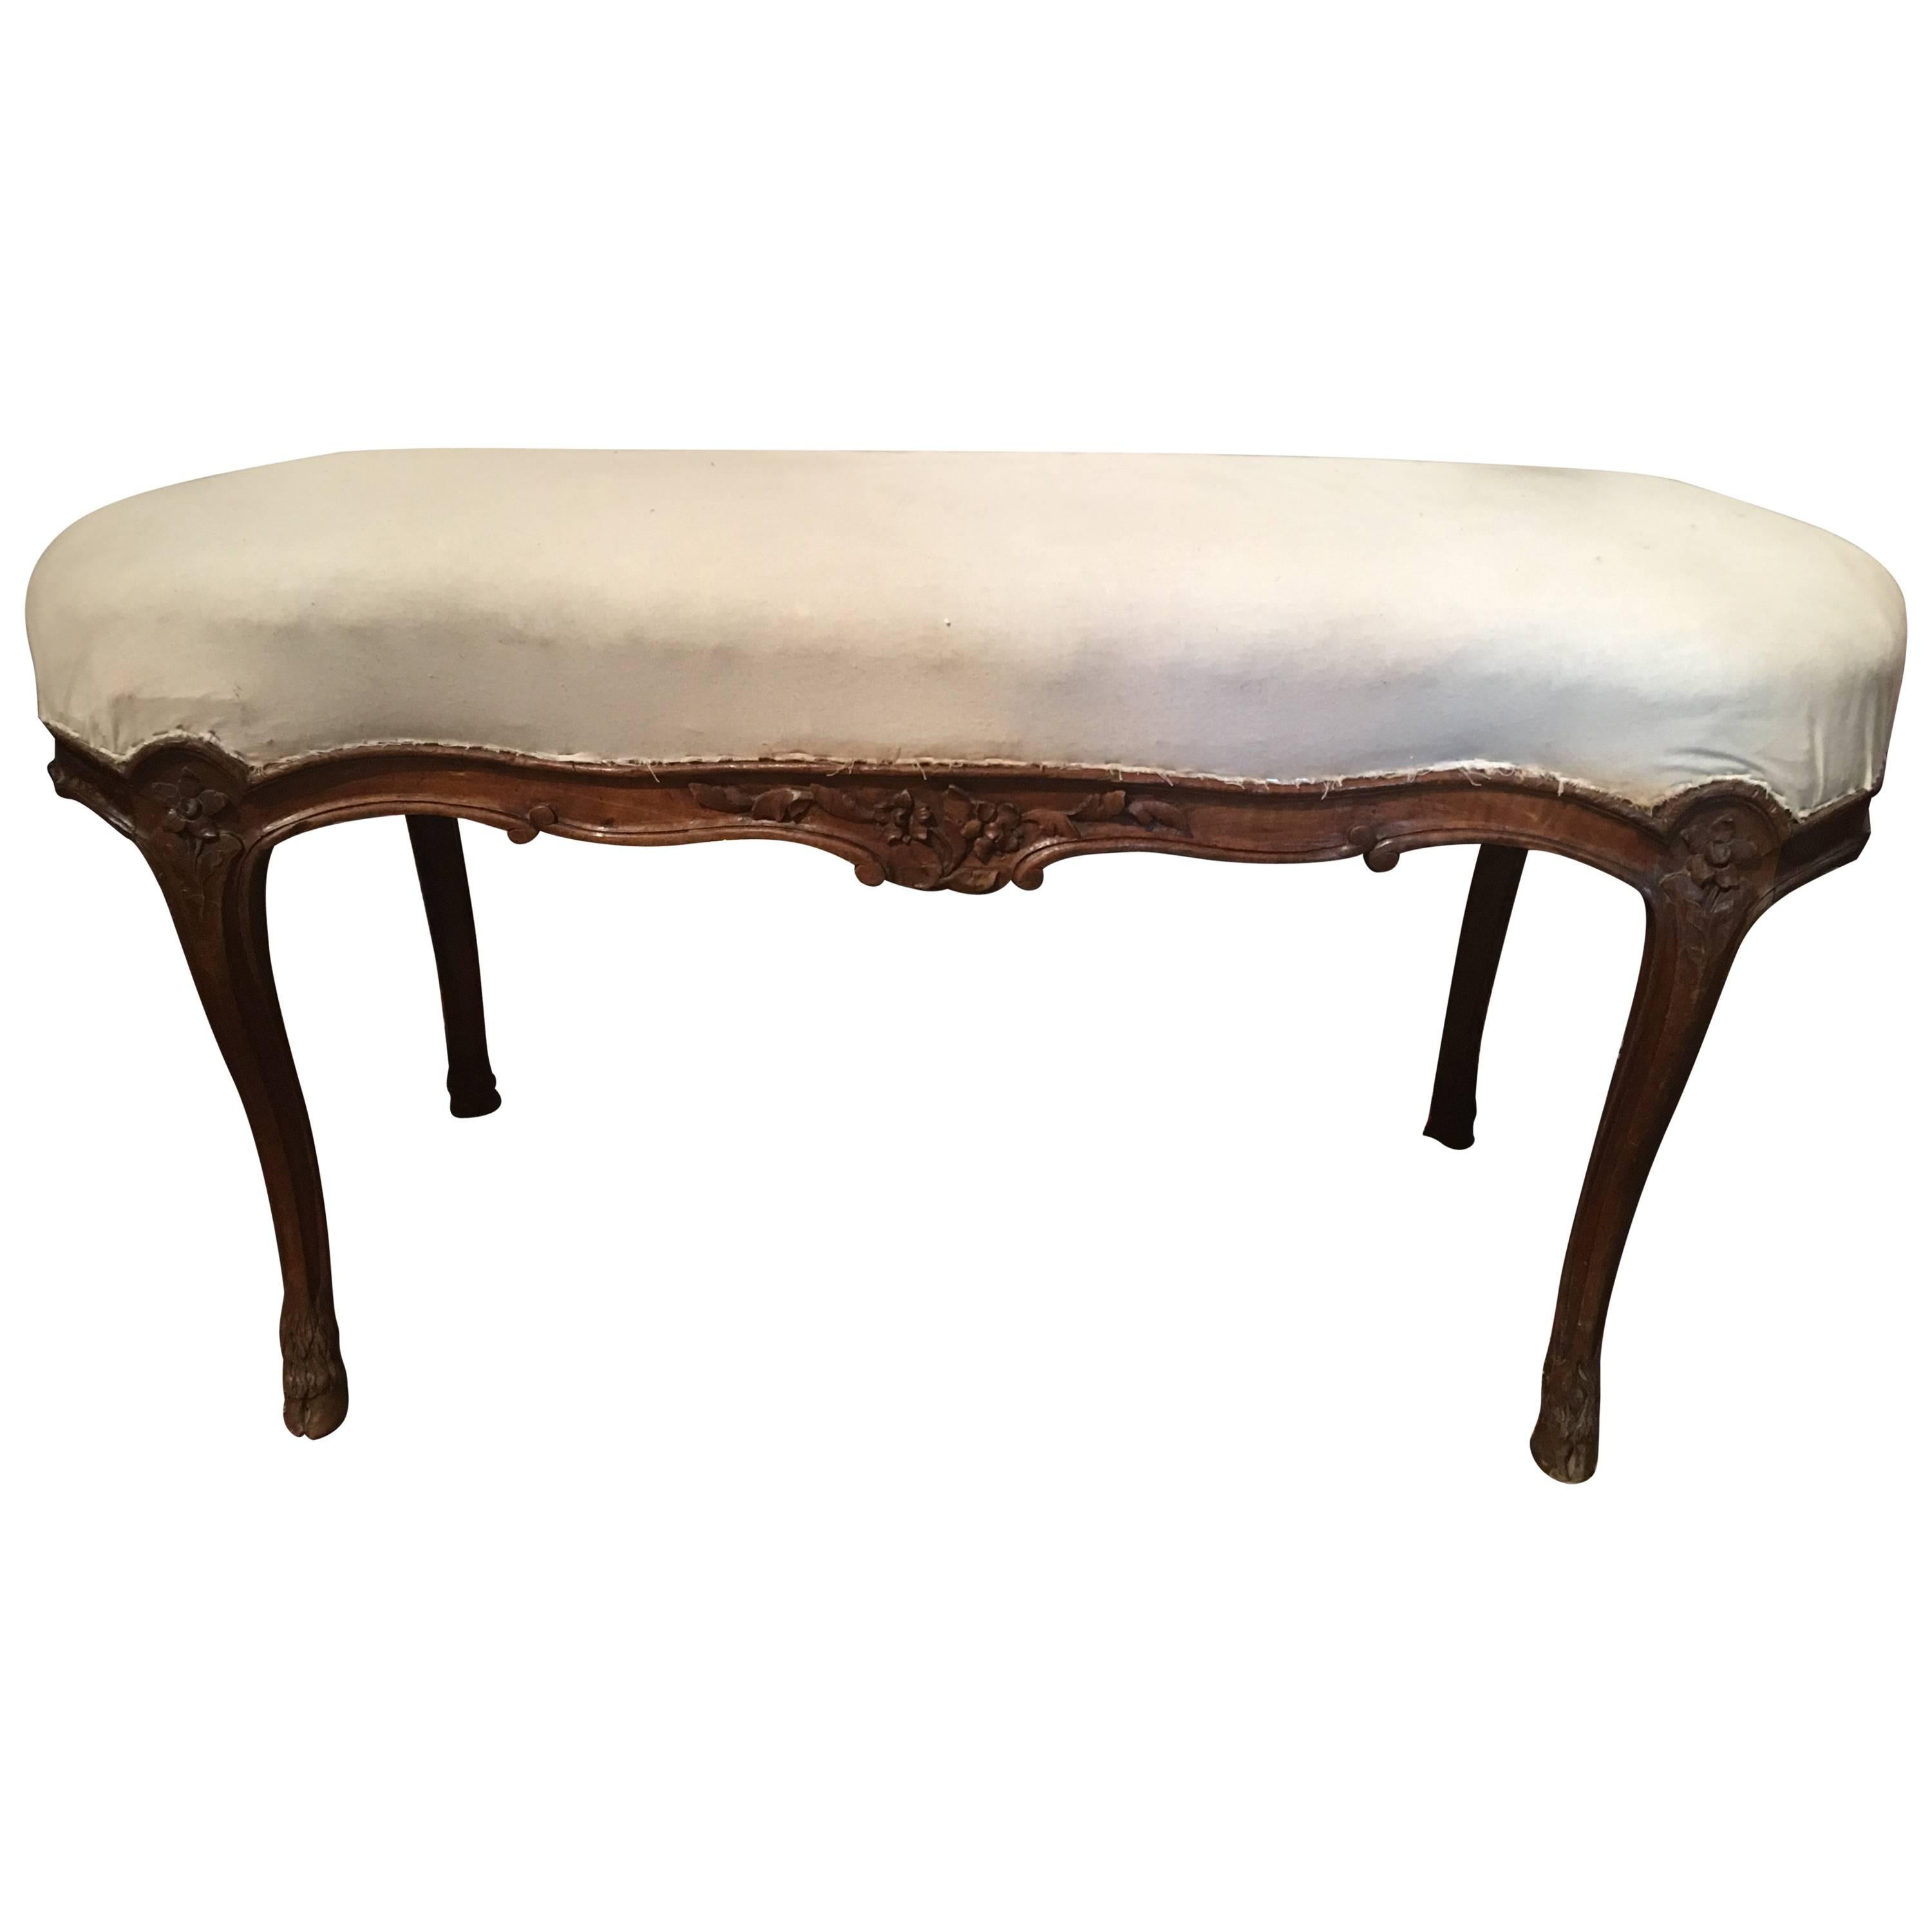 French Walnut Stool with Hoof Feet and Decorative Carvings, 19th Century For Sale